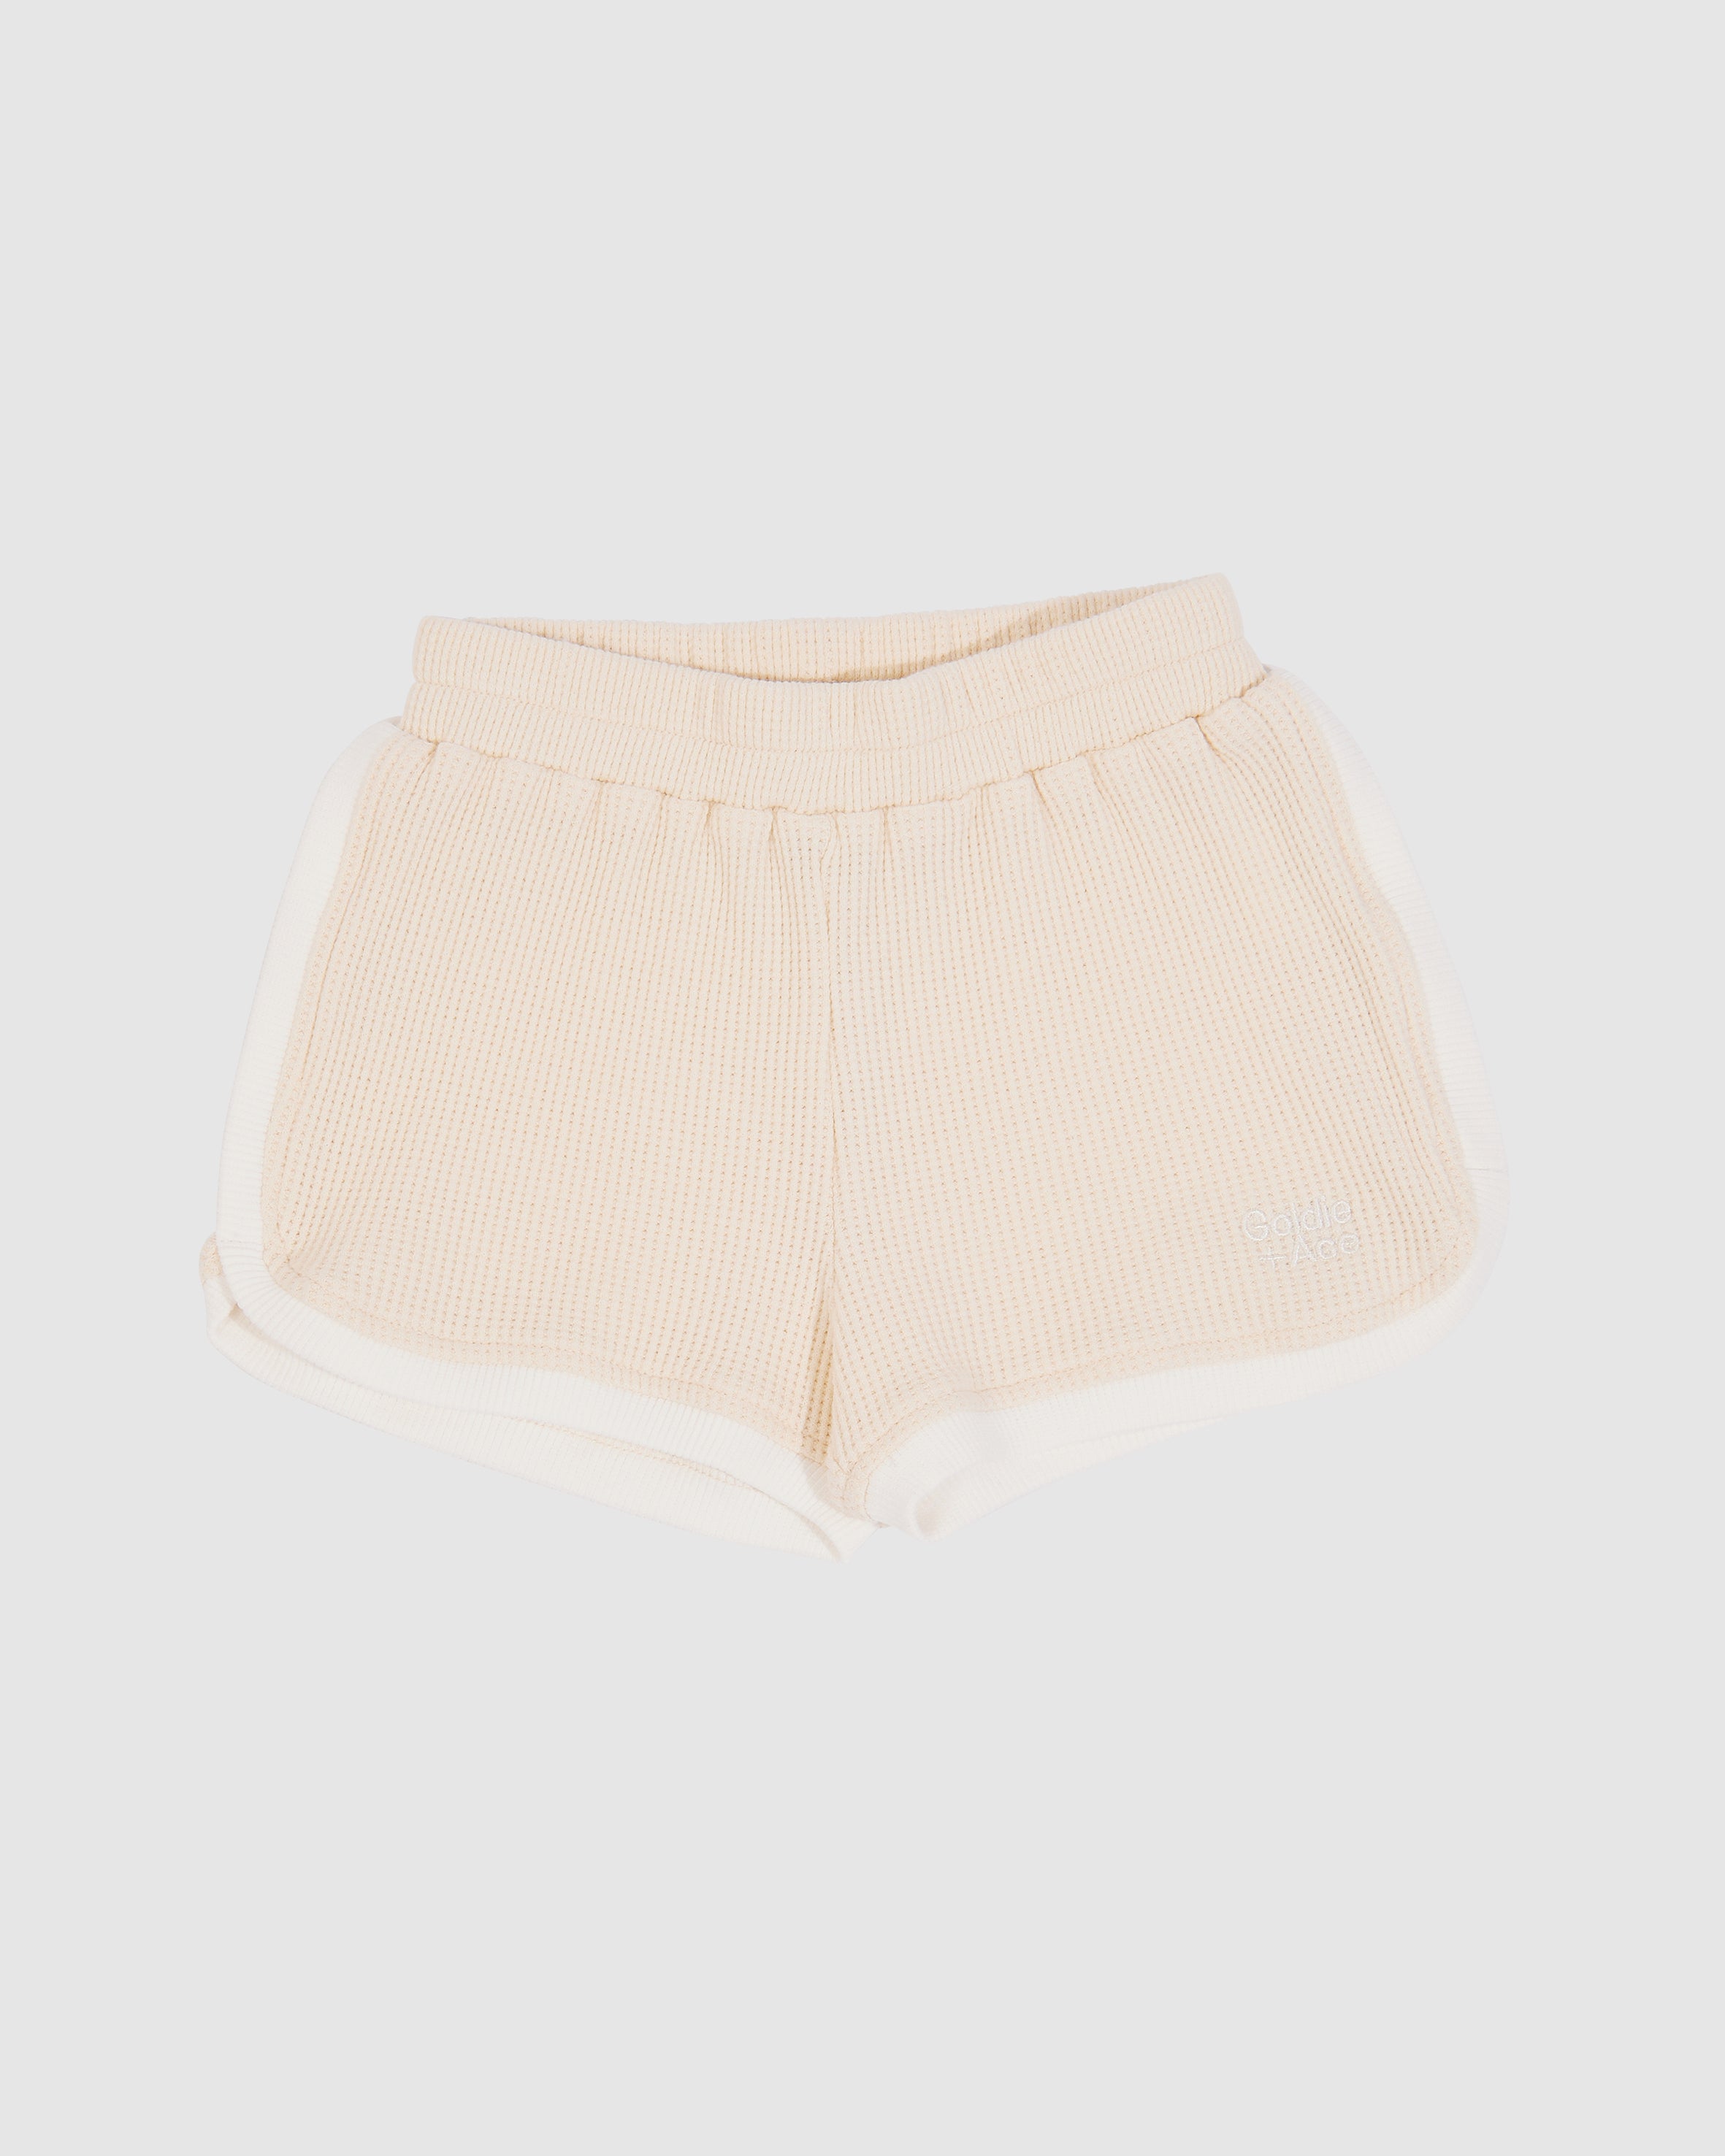 PRE ORDER - Goldie + Ace - Sadie Waffle Shorts - Antique White